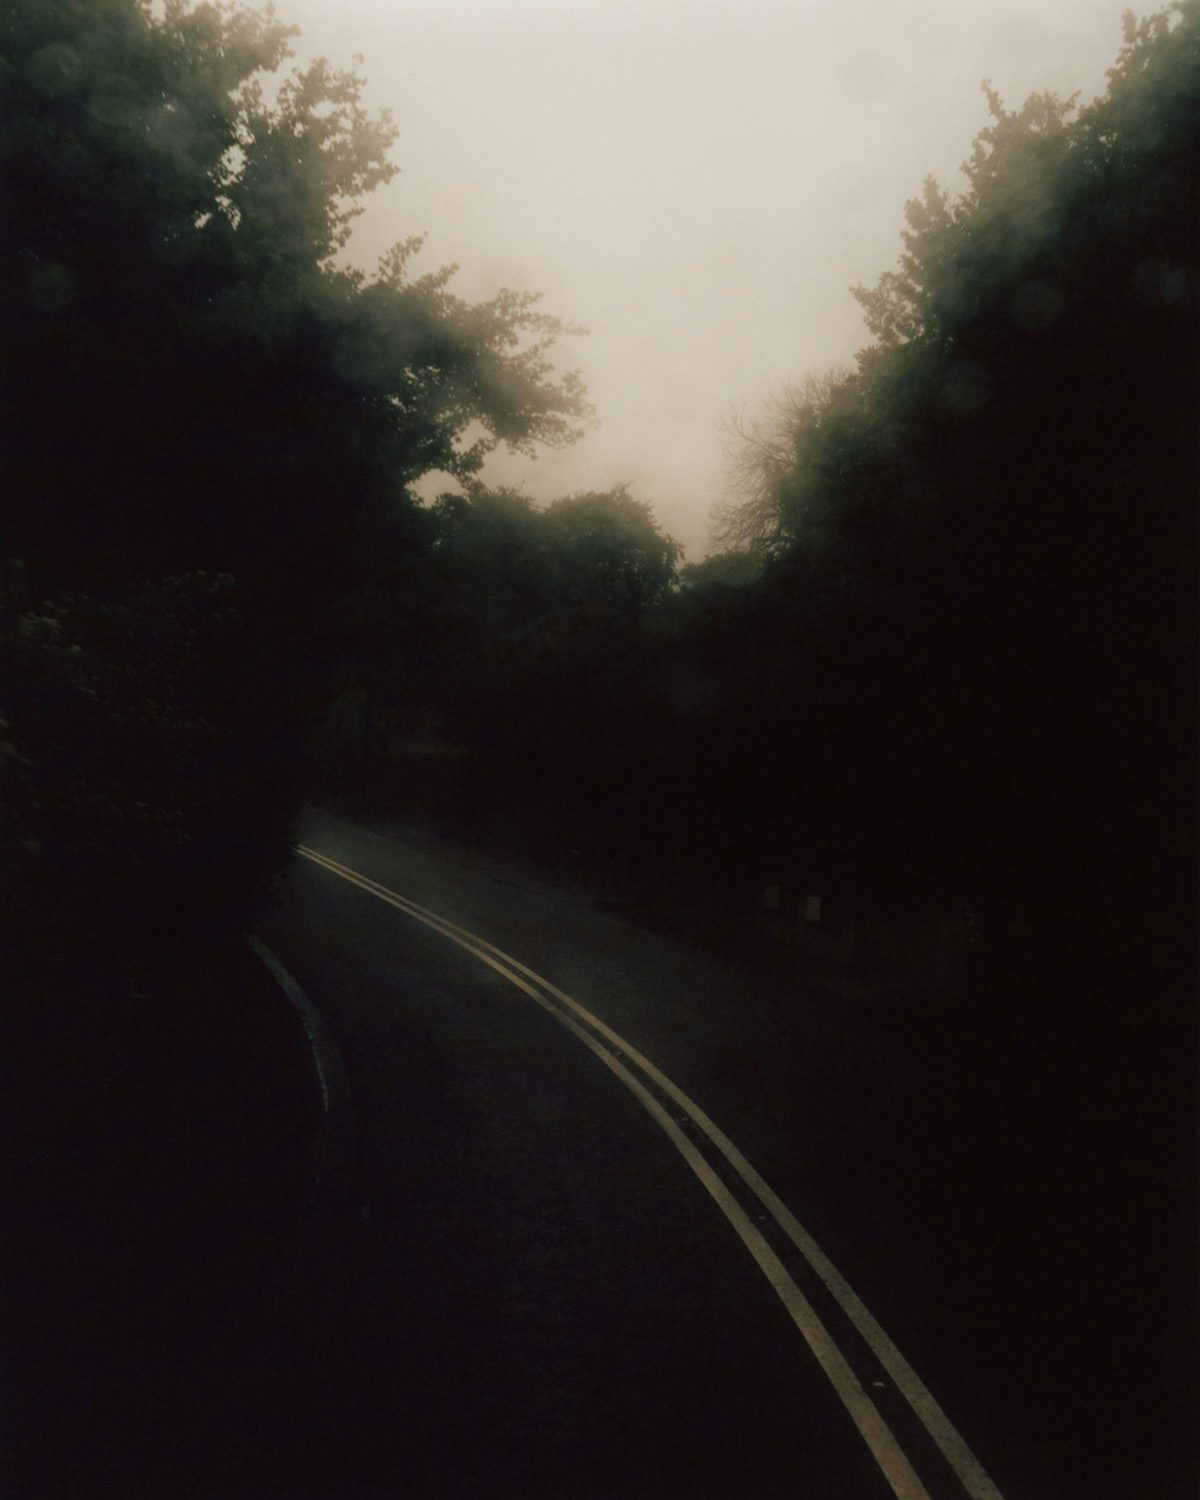 Photograph from Folly by Jamie Murray showing a road lined with trees